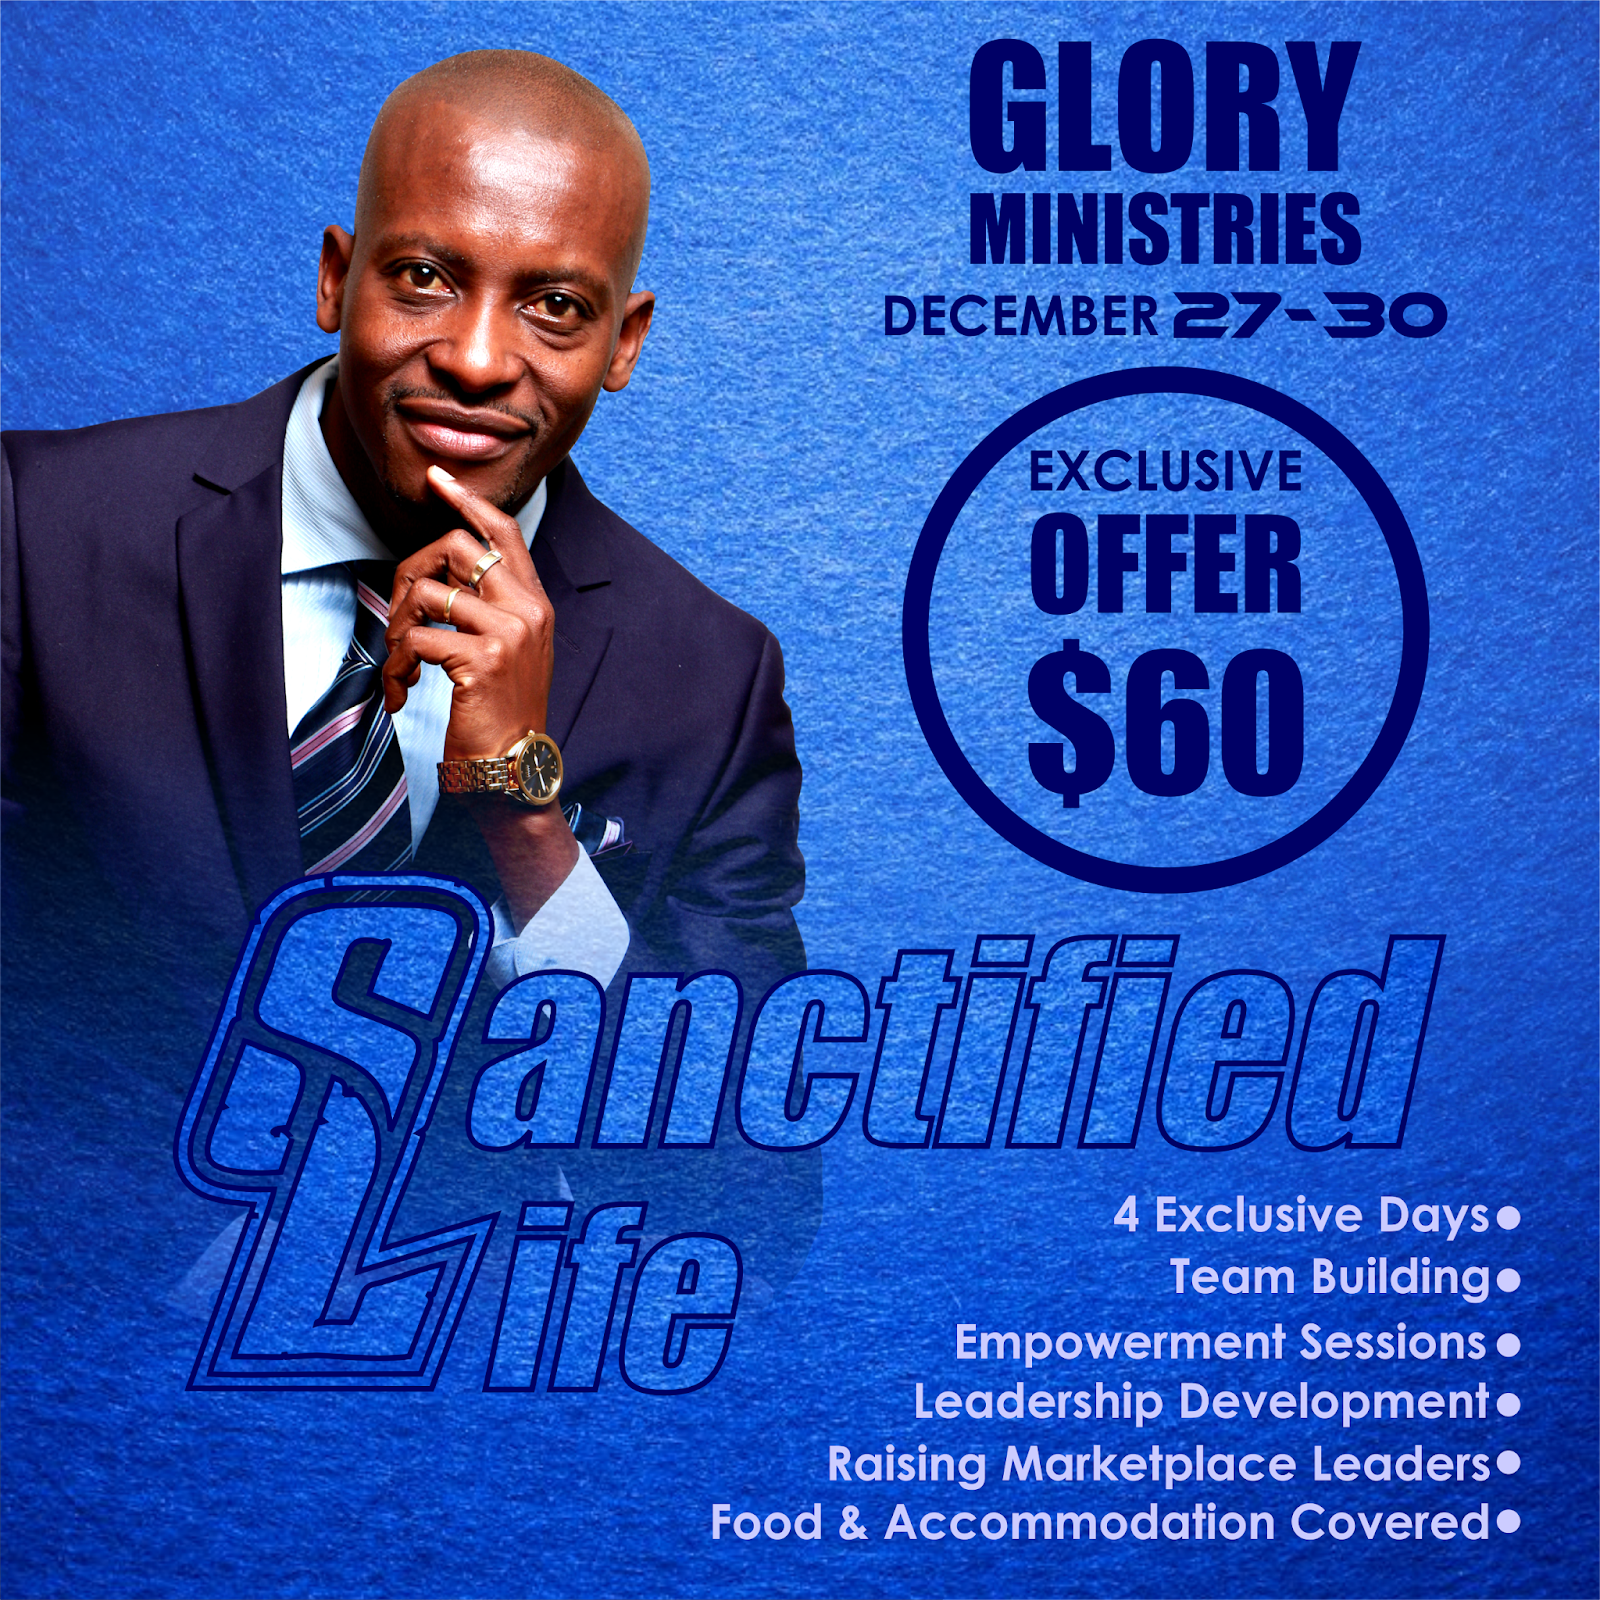  Ministers Conference 2019 and The Sanctified Life - with Apostle P. Sibiya